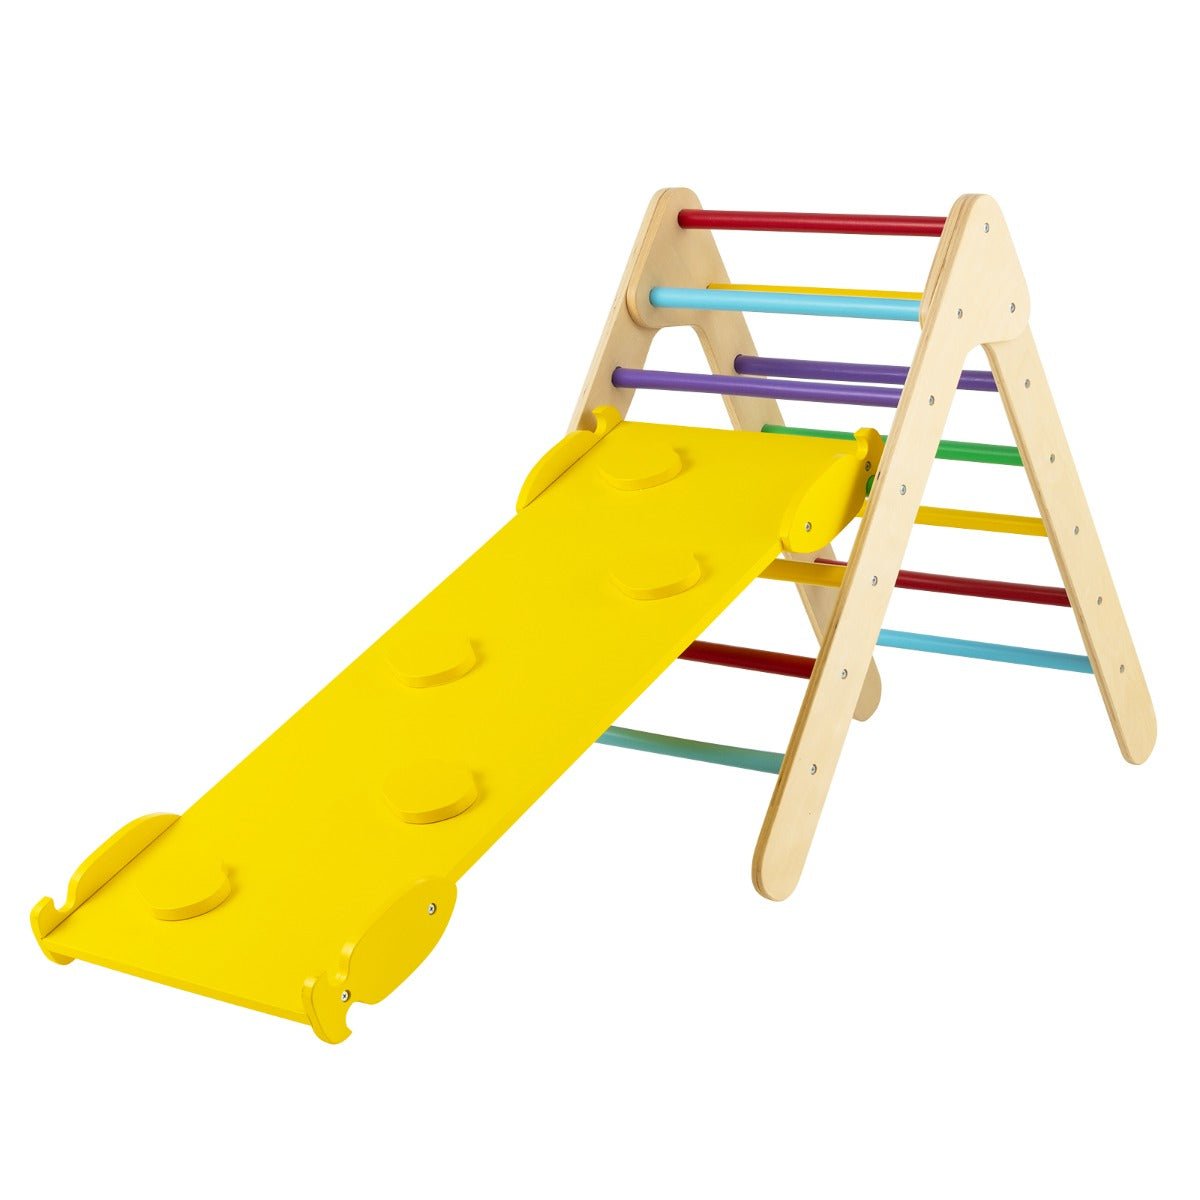 3-in-1 Kid Wooden Climbing Triangle Set - Slide and Reversible Ramp